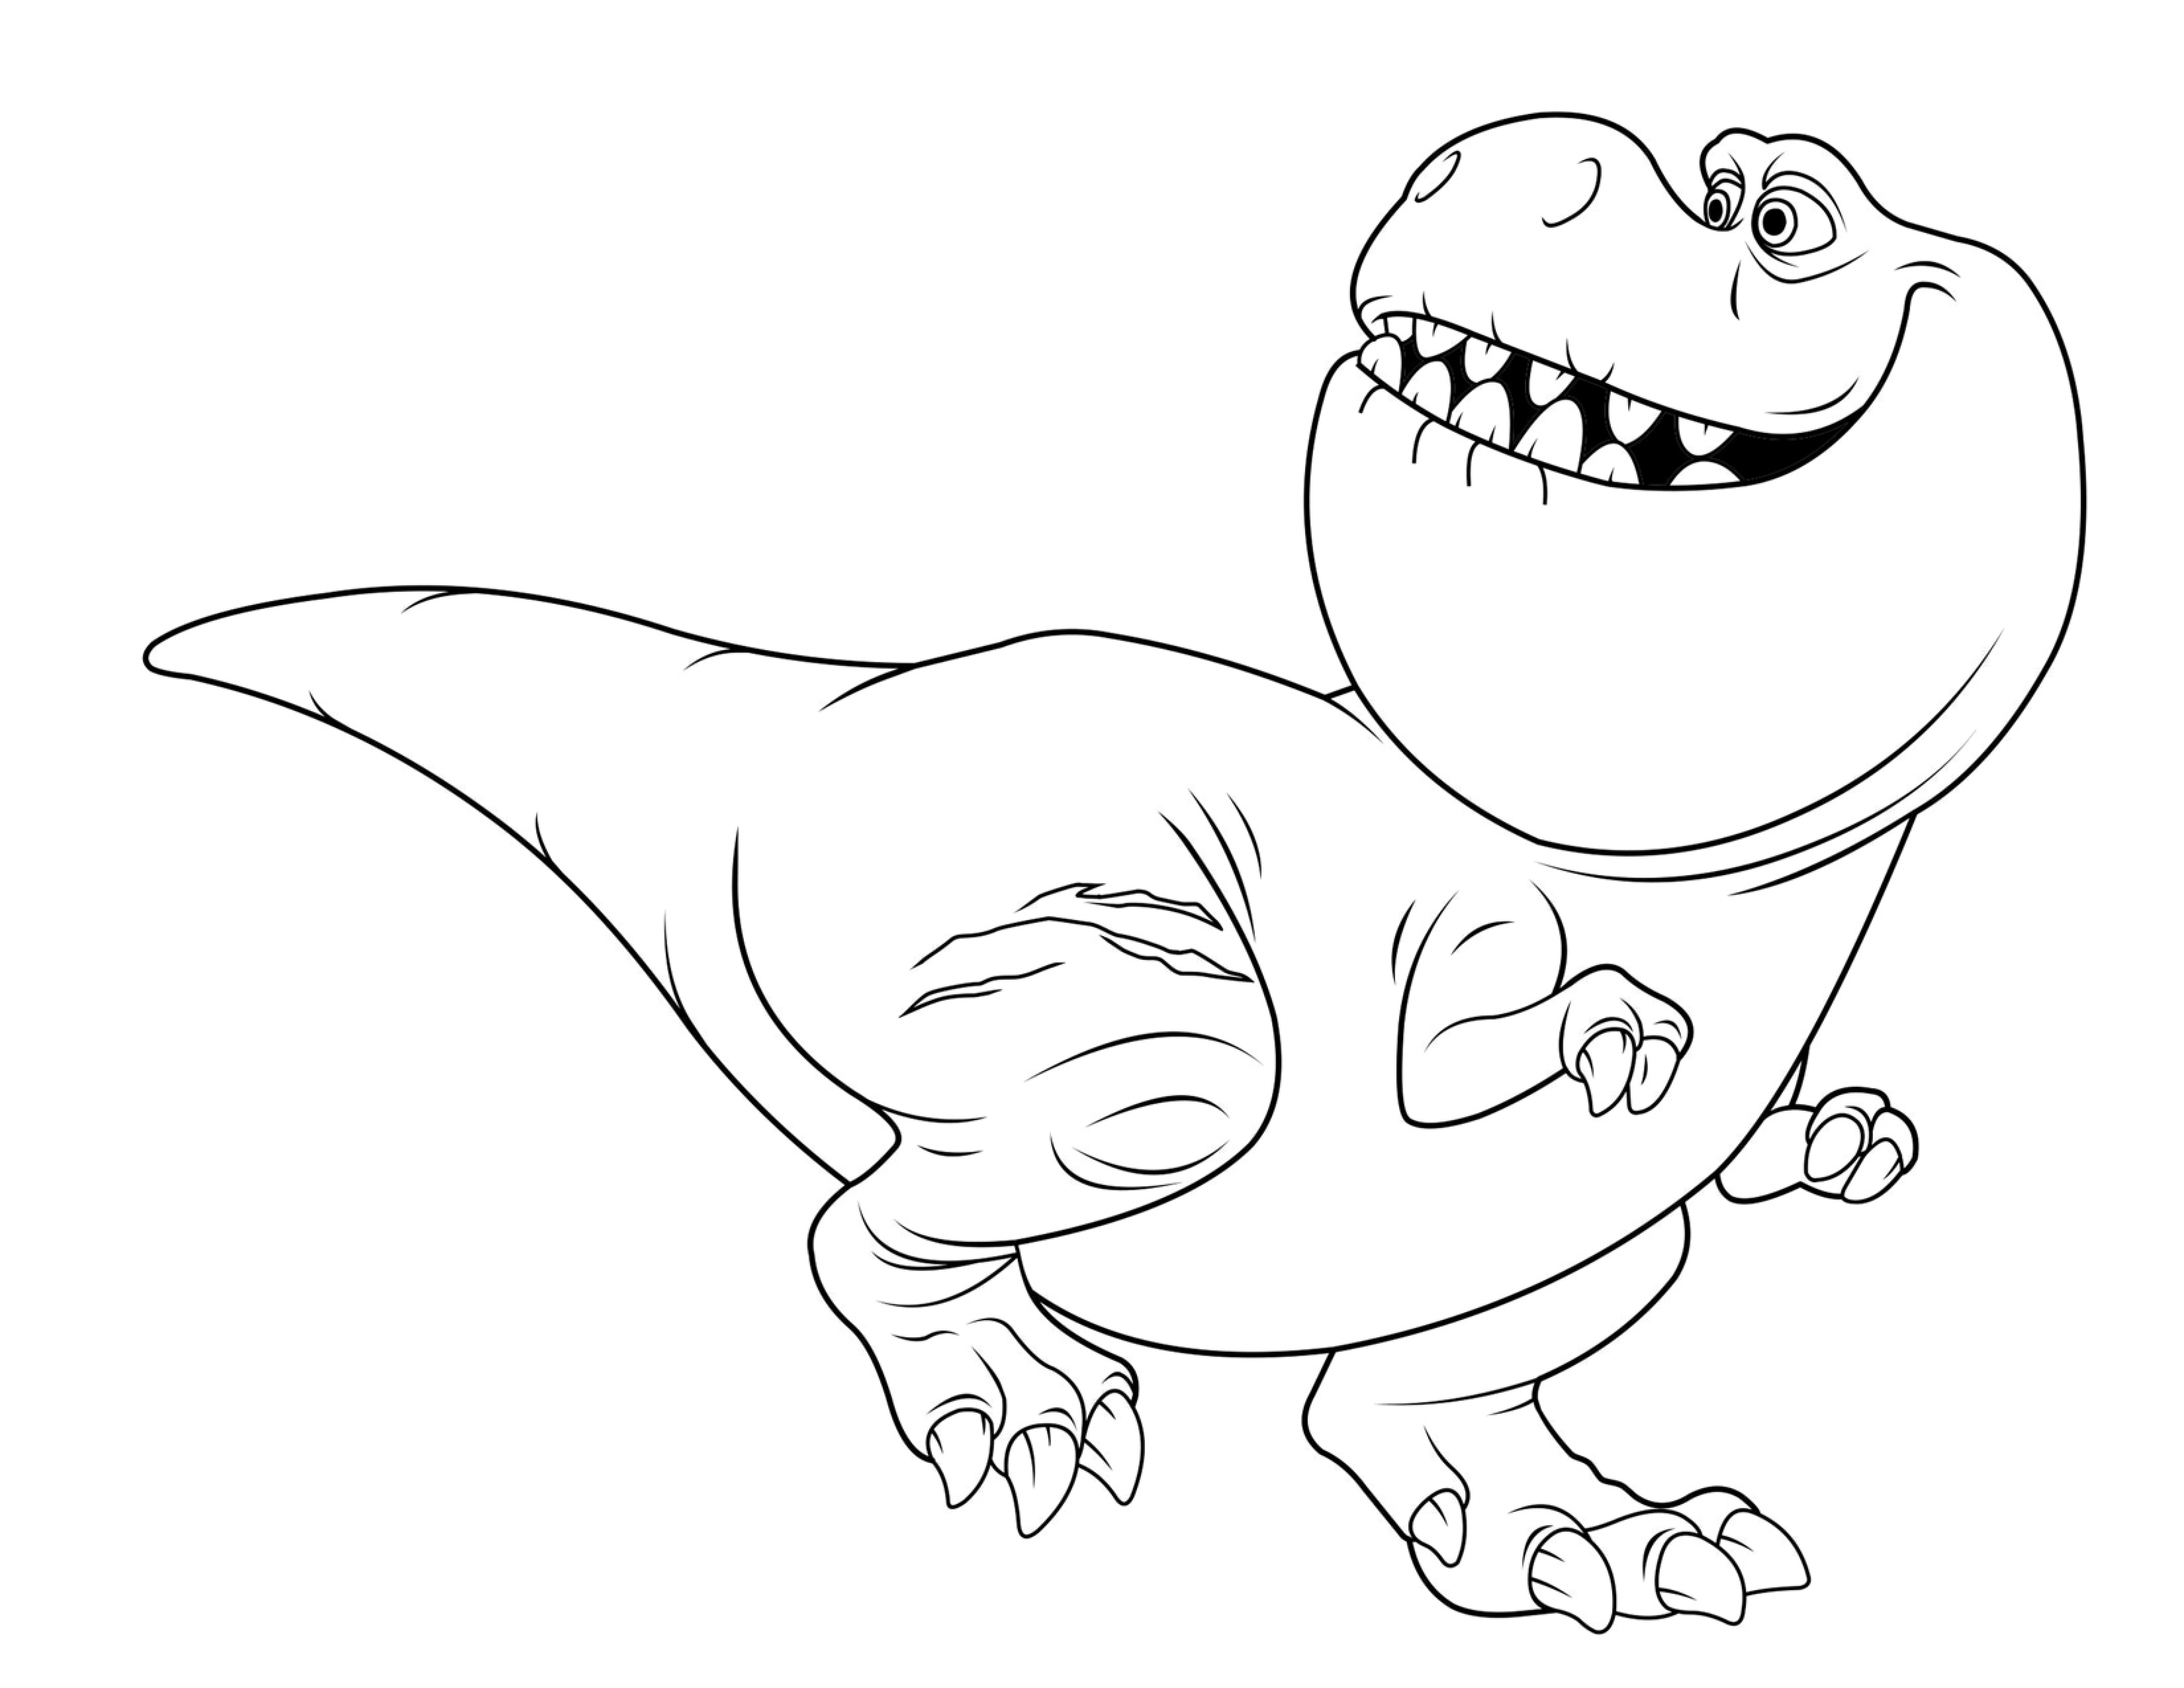 The good dinosaur coloring pages to download and print for free